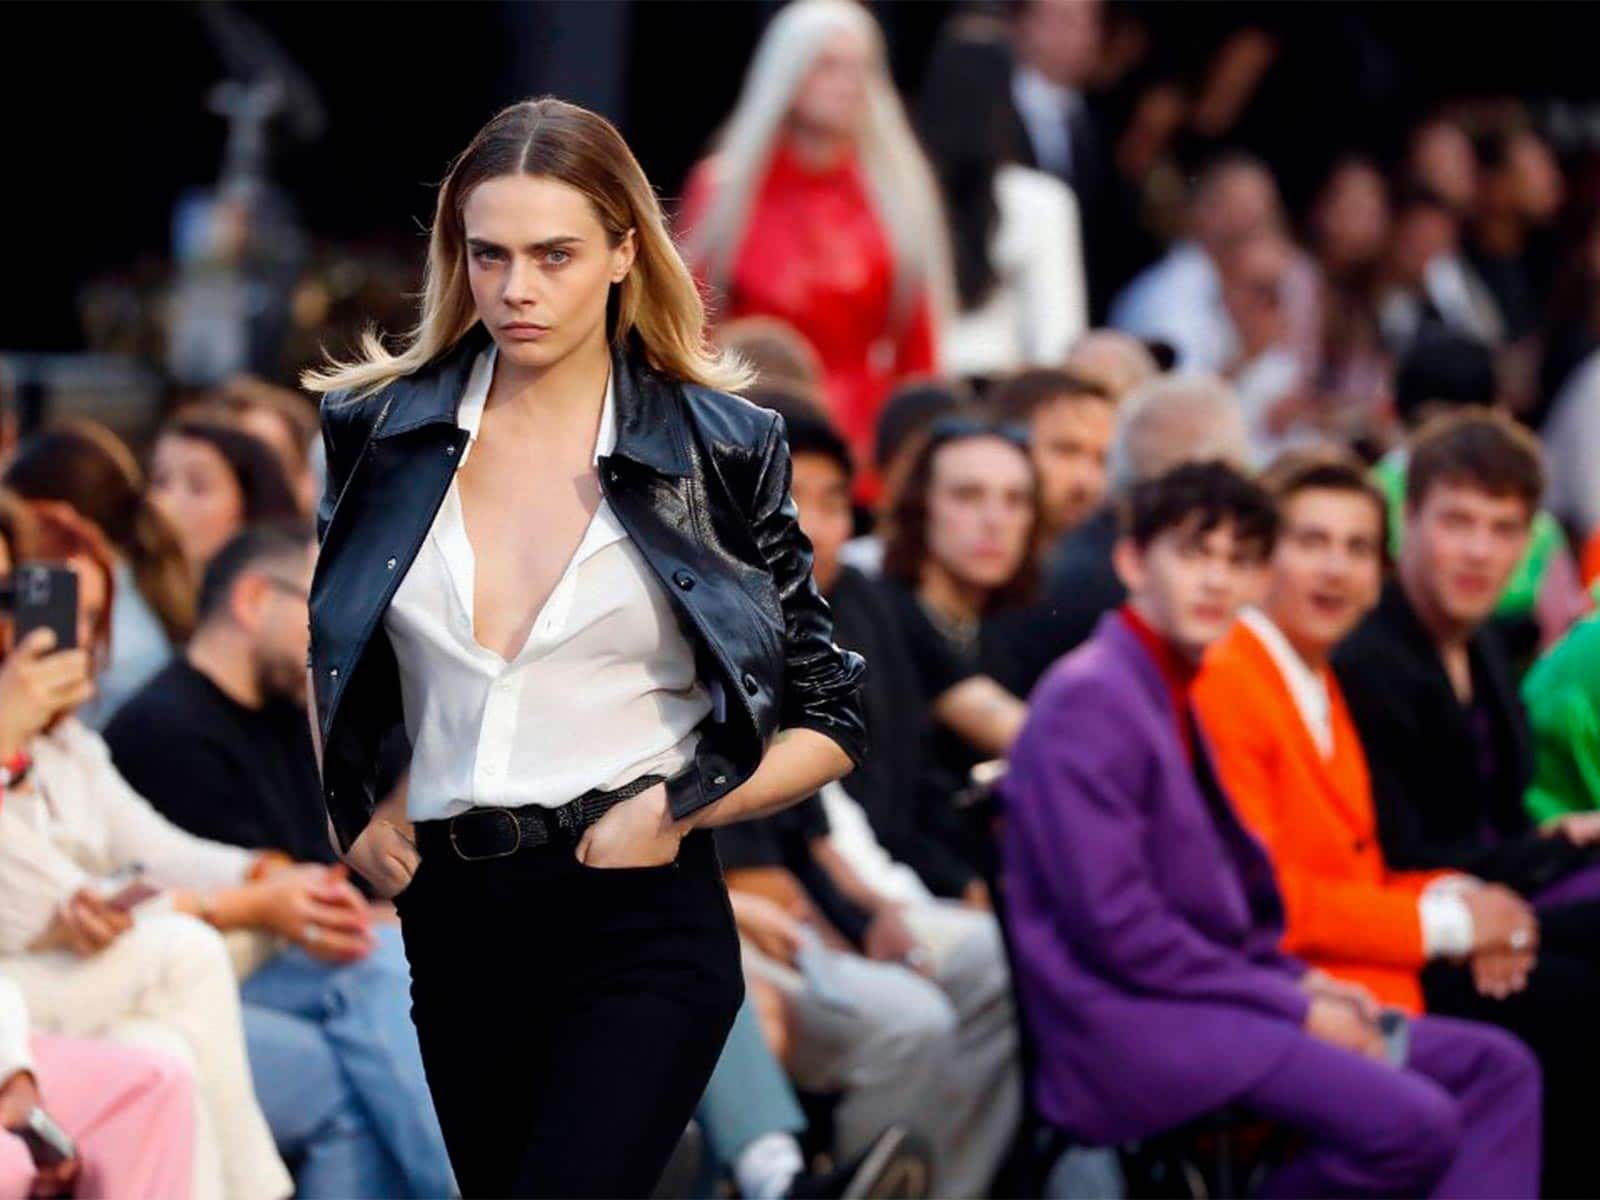 Here’s why Cara Delevingne went viral during PFW